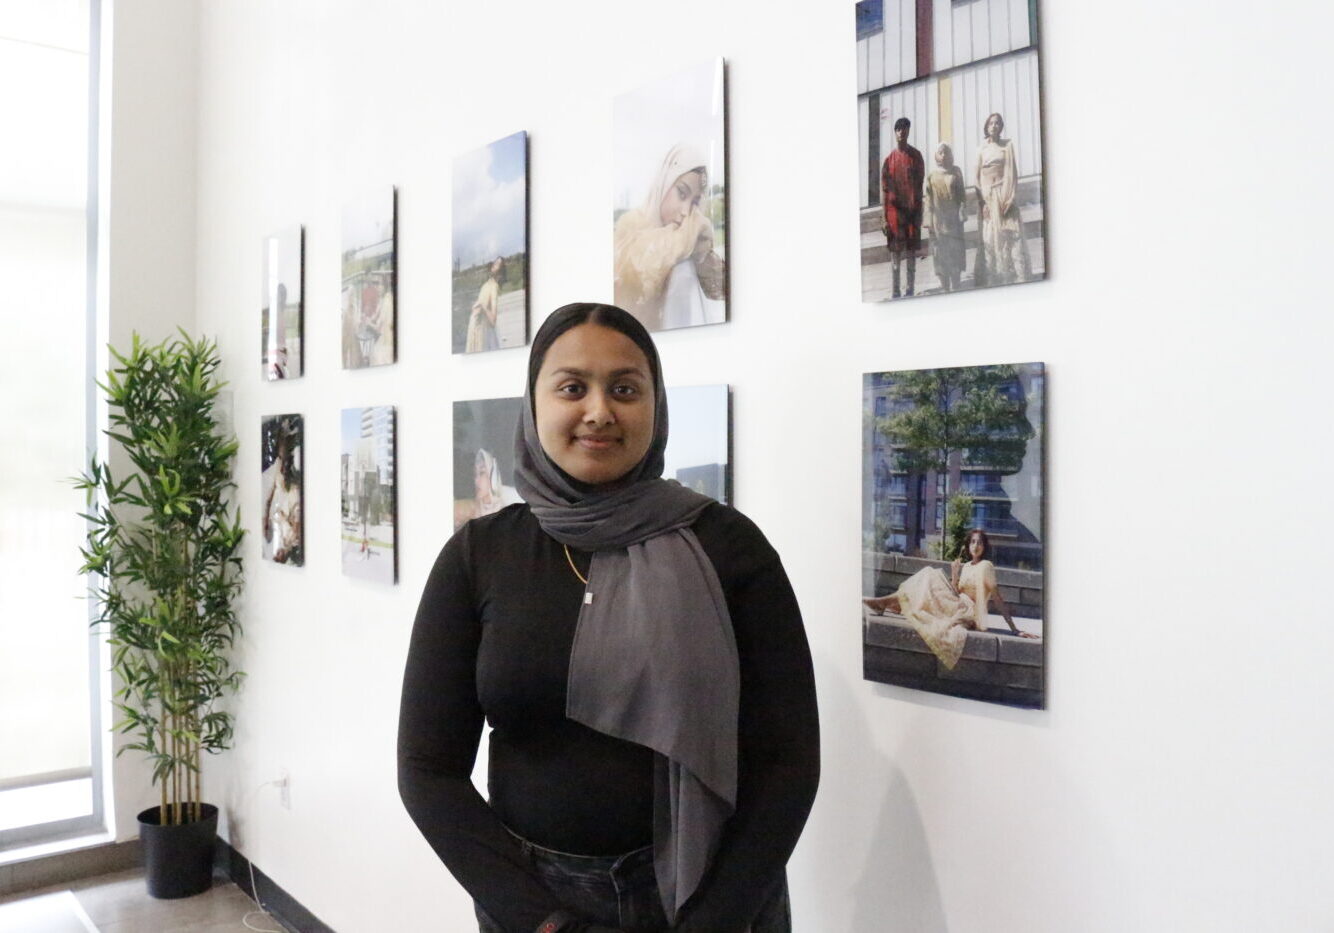 Humaira Rahman stands in front of multiple photos on a wall